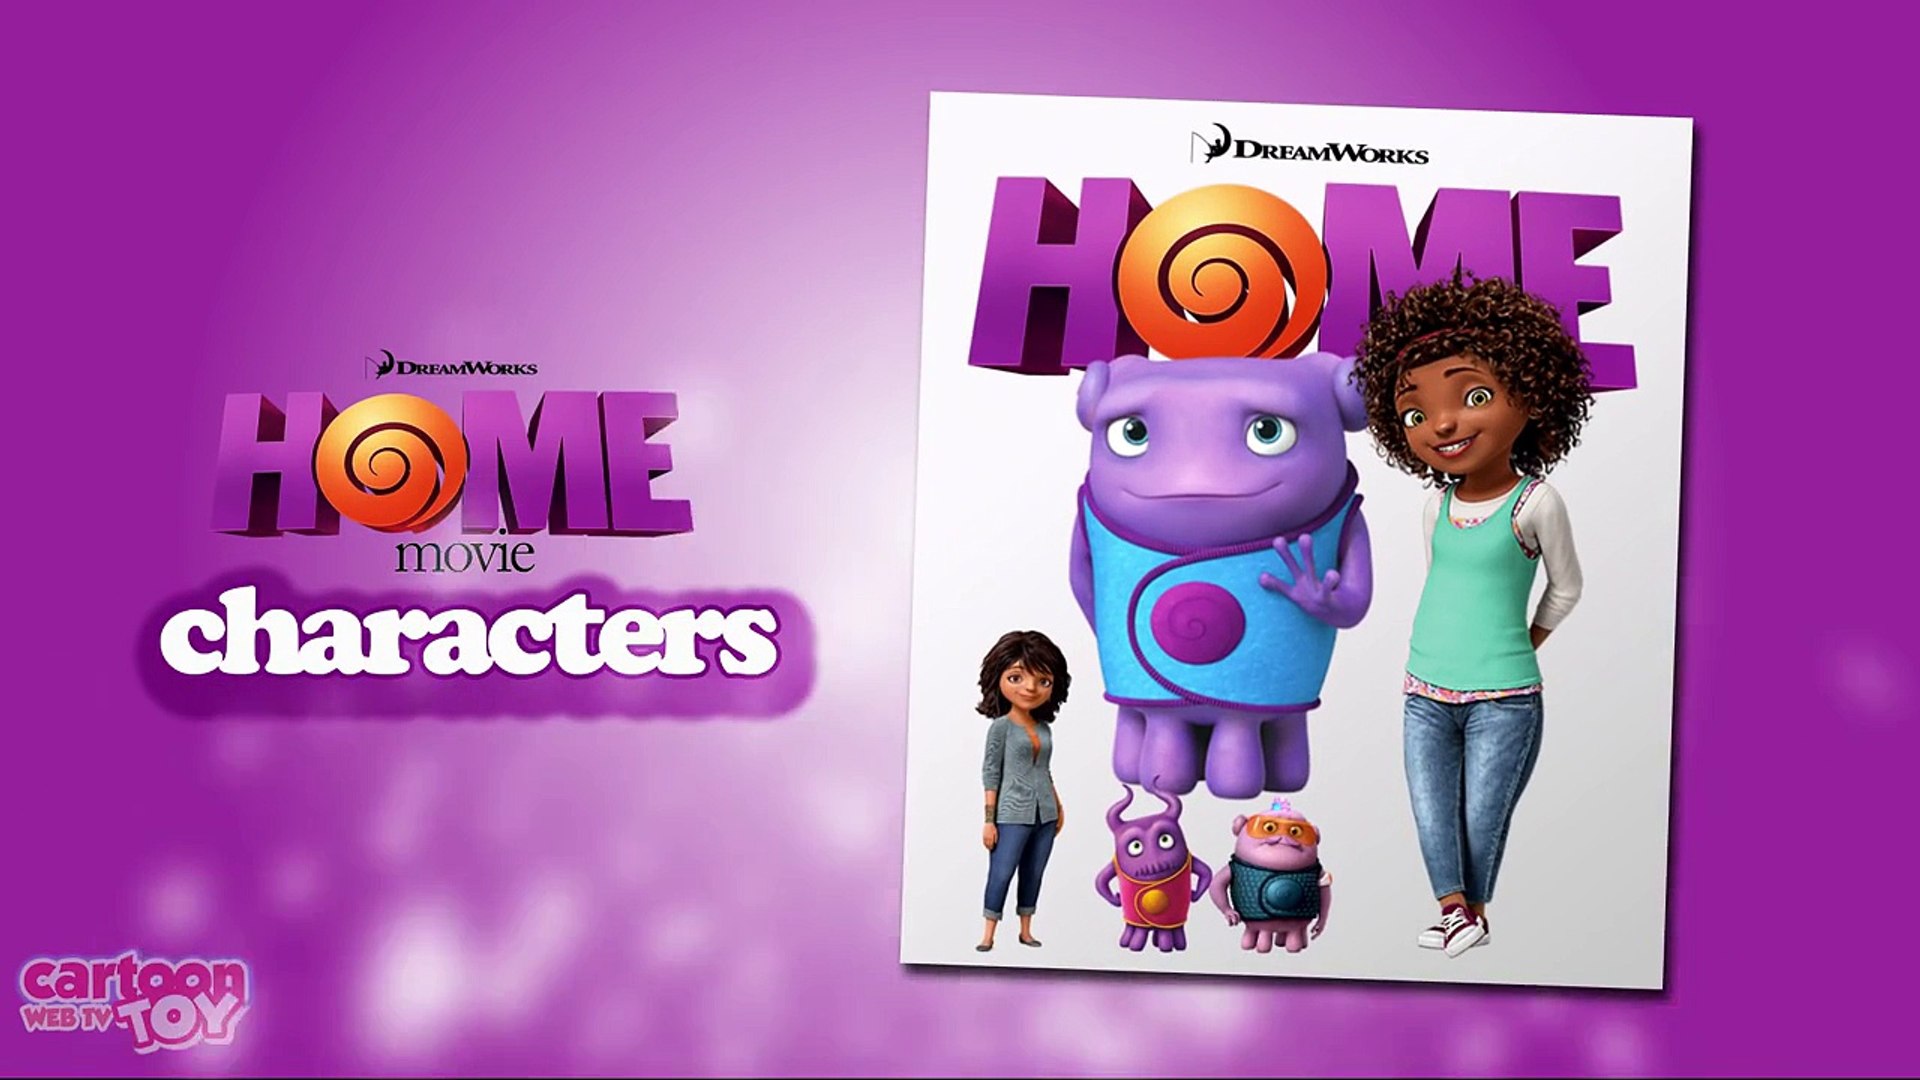 Dreamworks Home Movie Characters By Cartoon Toy Webtv Dailymotion Video